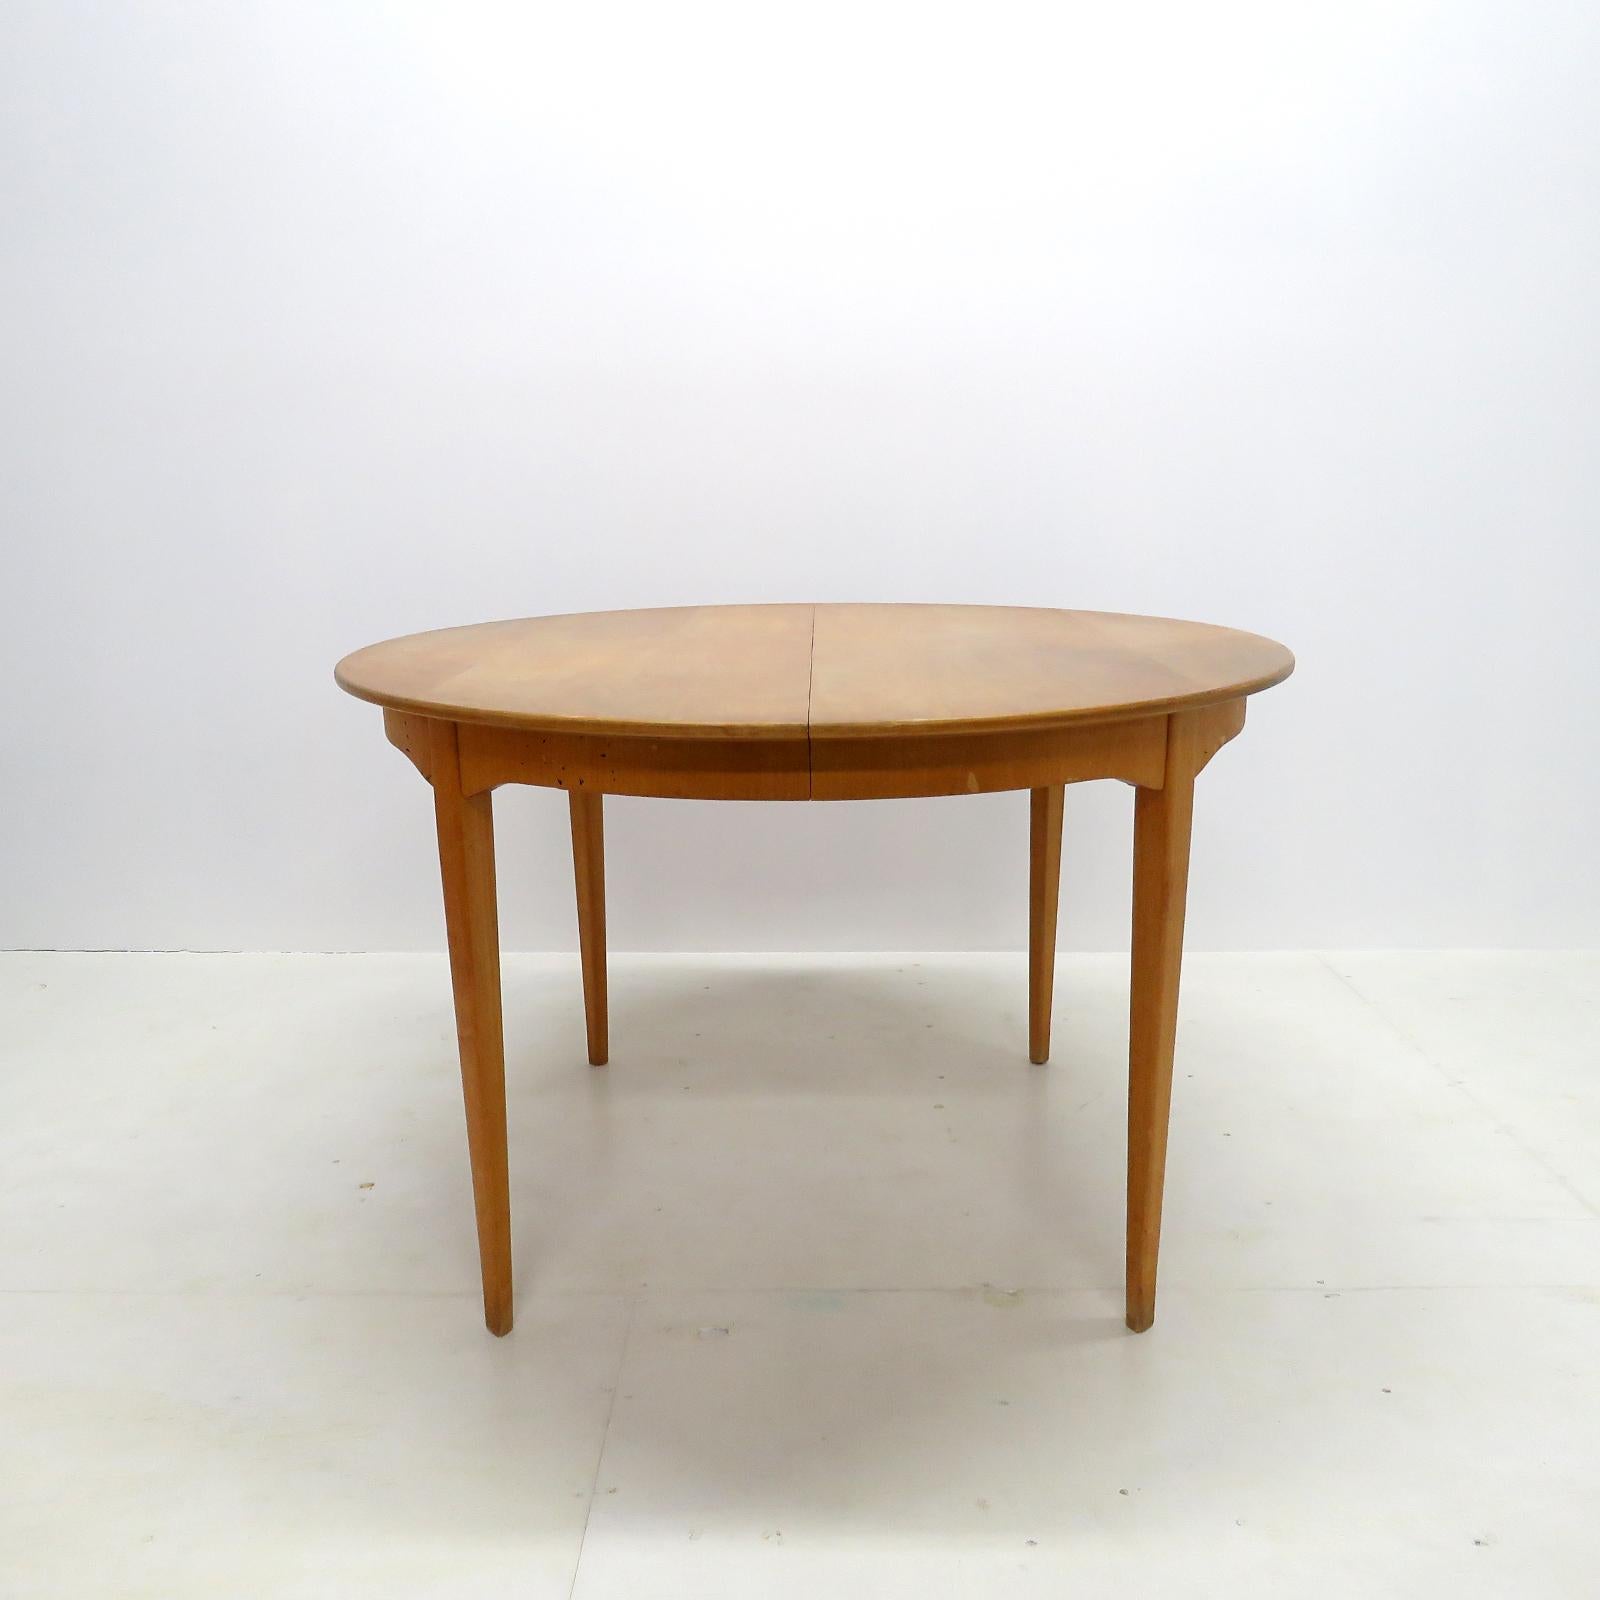 wonderful dining table in beech with veneered top, by Carl Malmsten for Waggeryds Möbelfabrik AB, Sweden, 1950, in its smallest configuration the table is round with 45.66 inch diameter. Table comes with two additional 21.65 inch wide leaves which